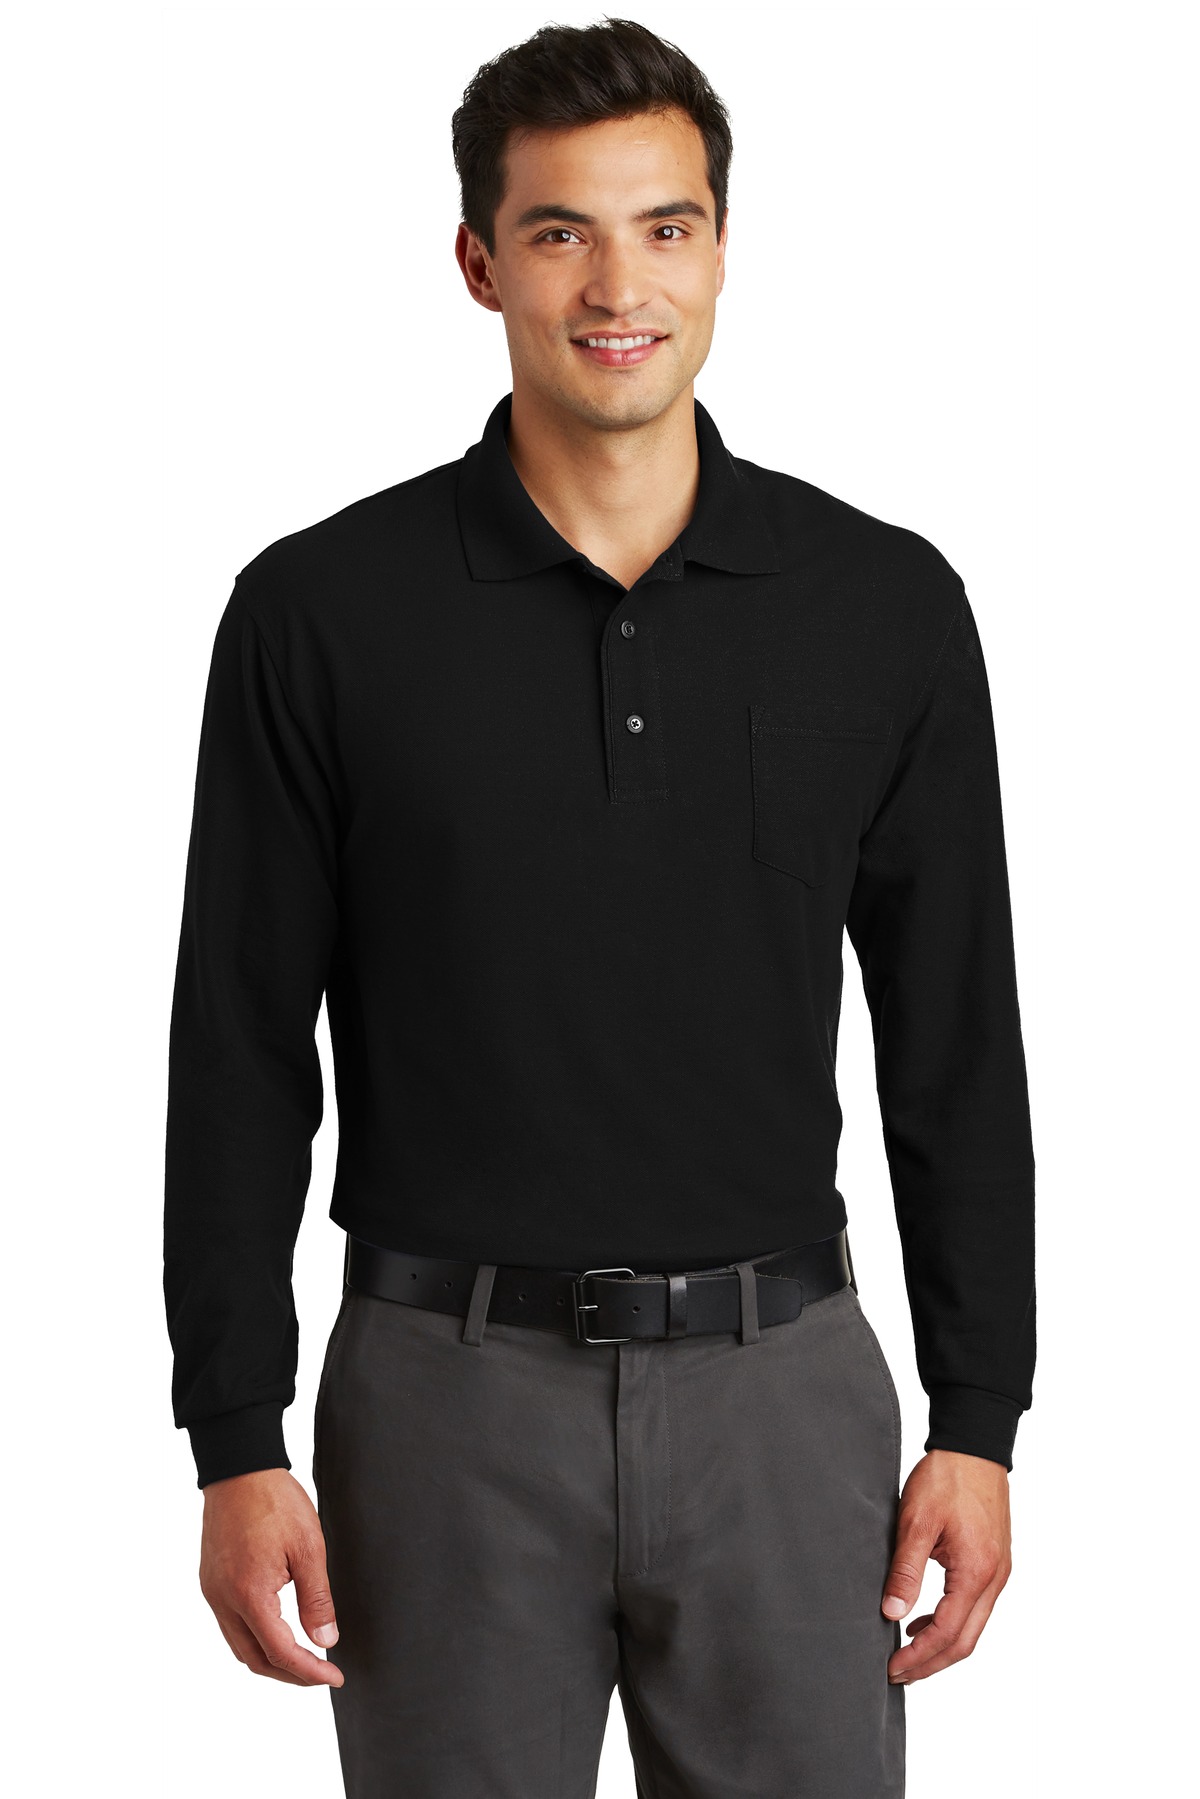 Port Authority Hospitality Polos & Knits ® Long Sleeve Silk Touch Polo with Pocket.-Port Authority